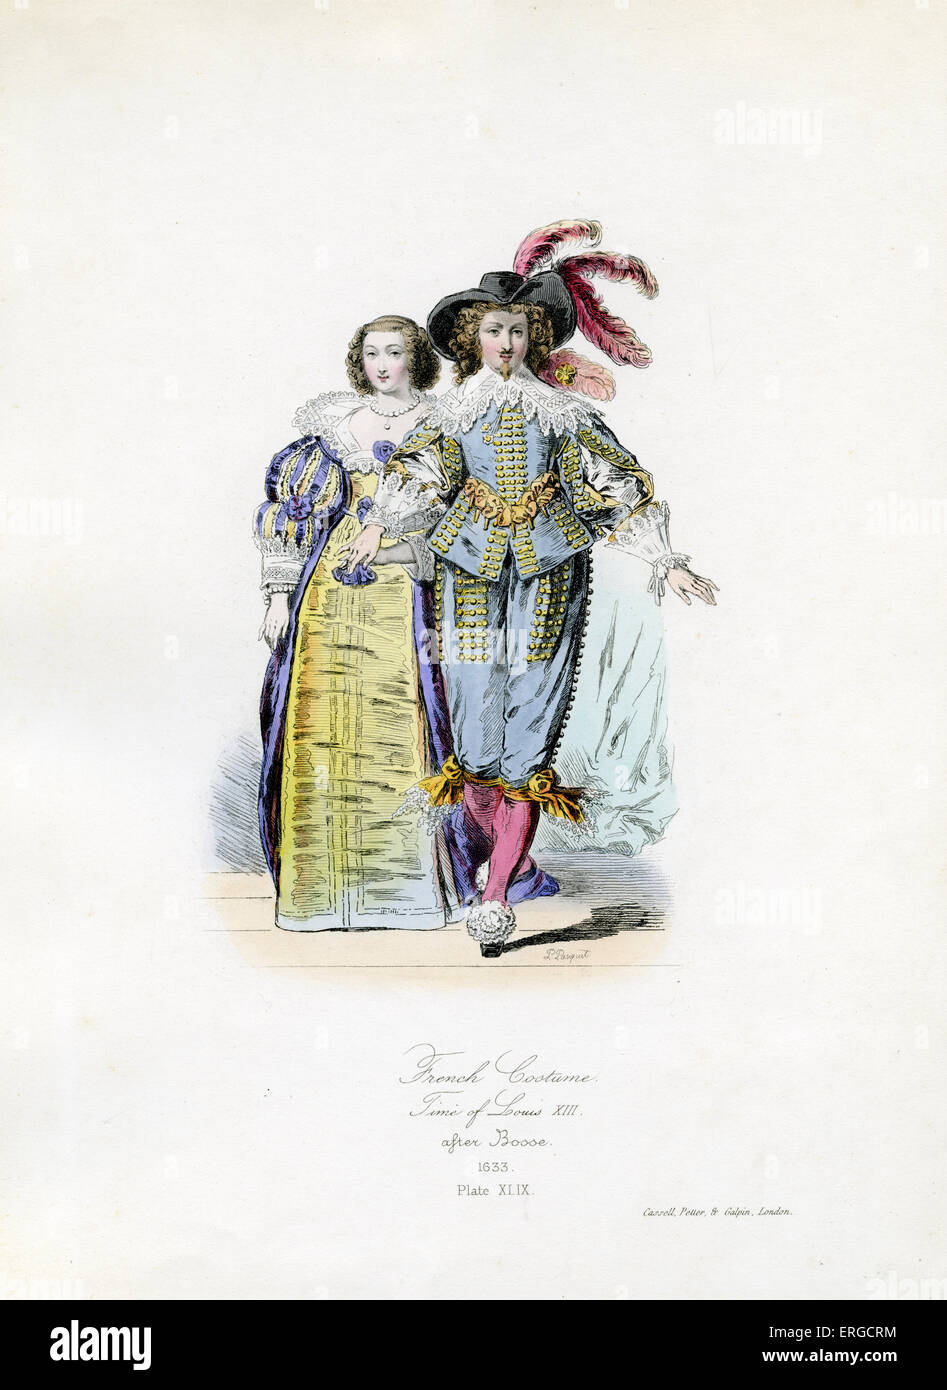 French costume from the time of Louis XIII. 1633 - from engraving by  Polidor Pauquet after Bosse. LXIII, King of France: 27 Stock Photo - Alamy